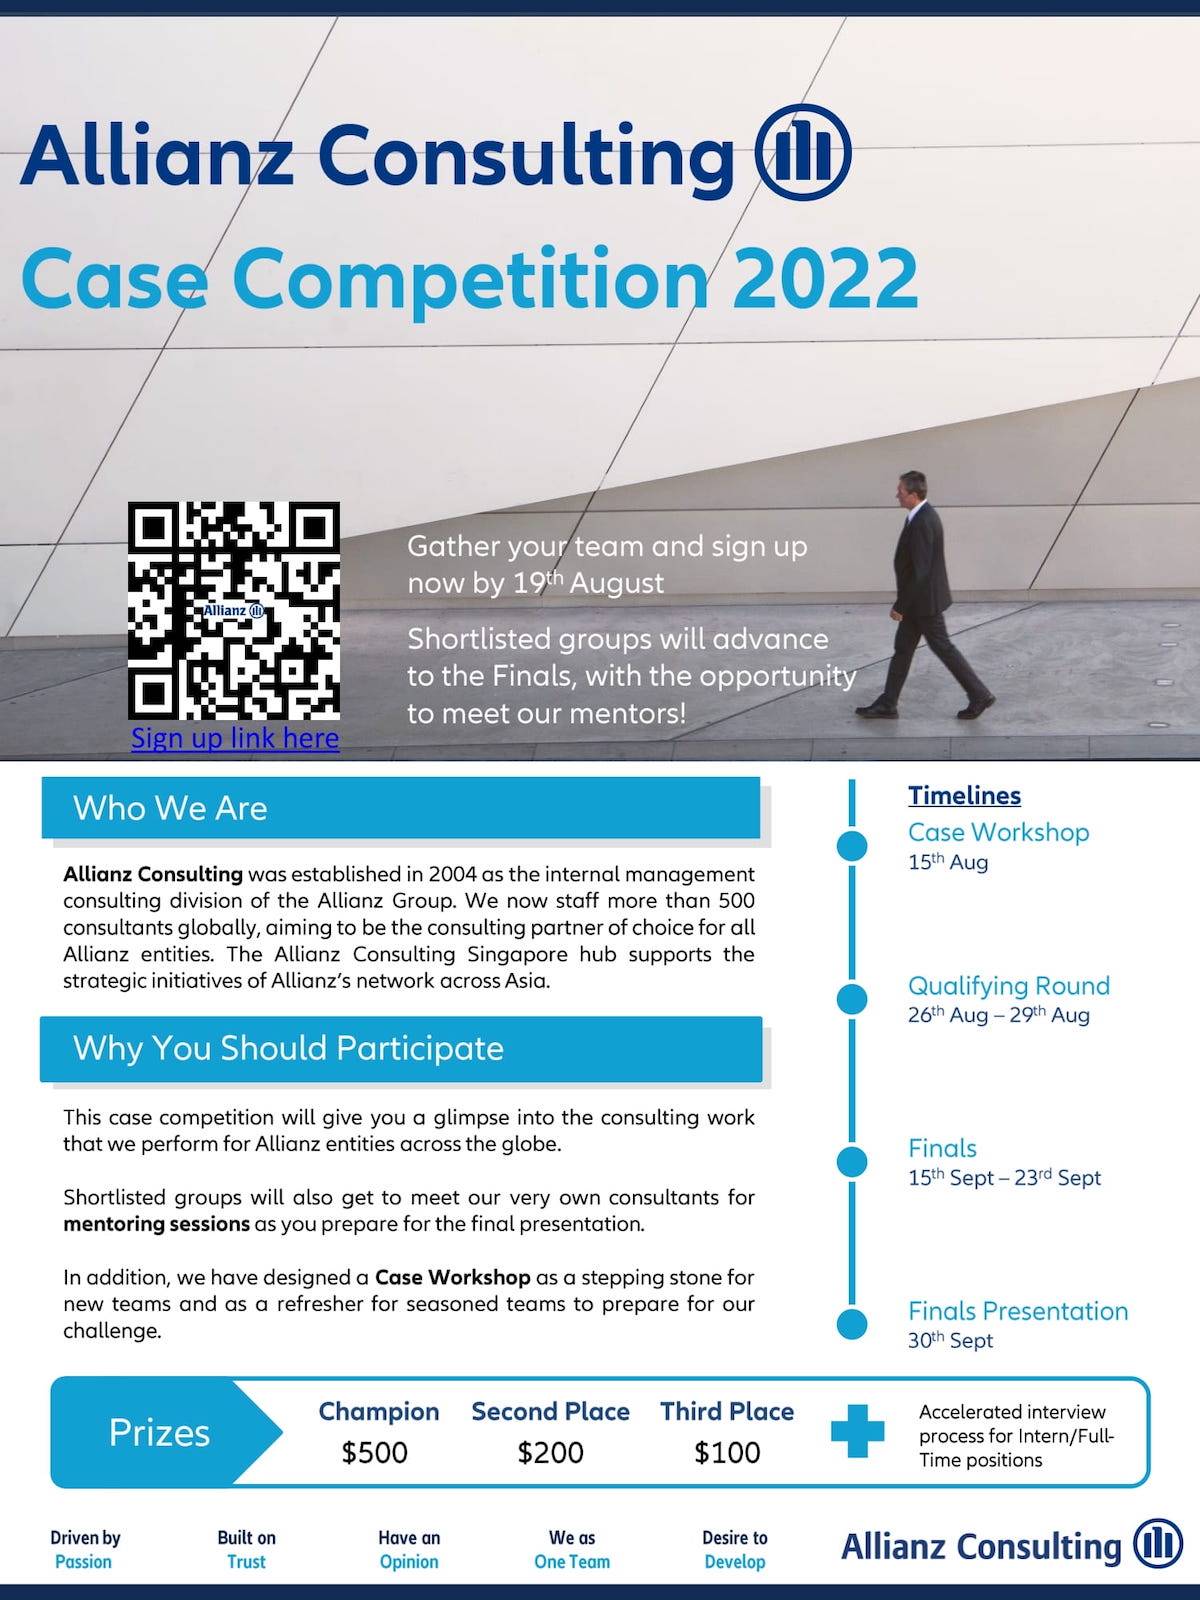 Allianz Consulting Case Competition 2022 EDM image